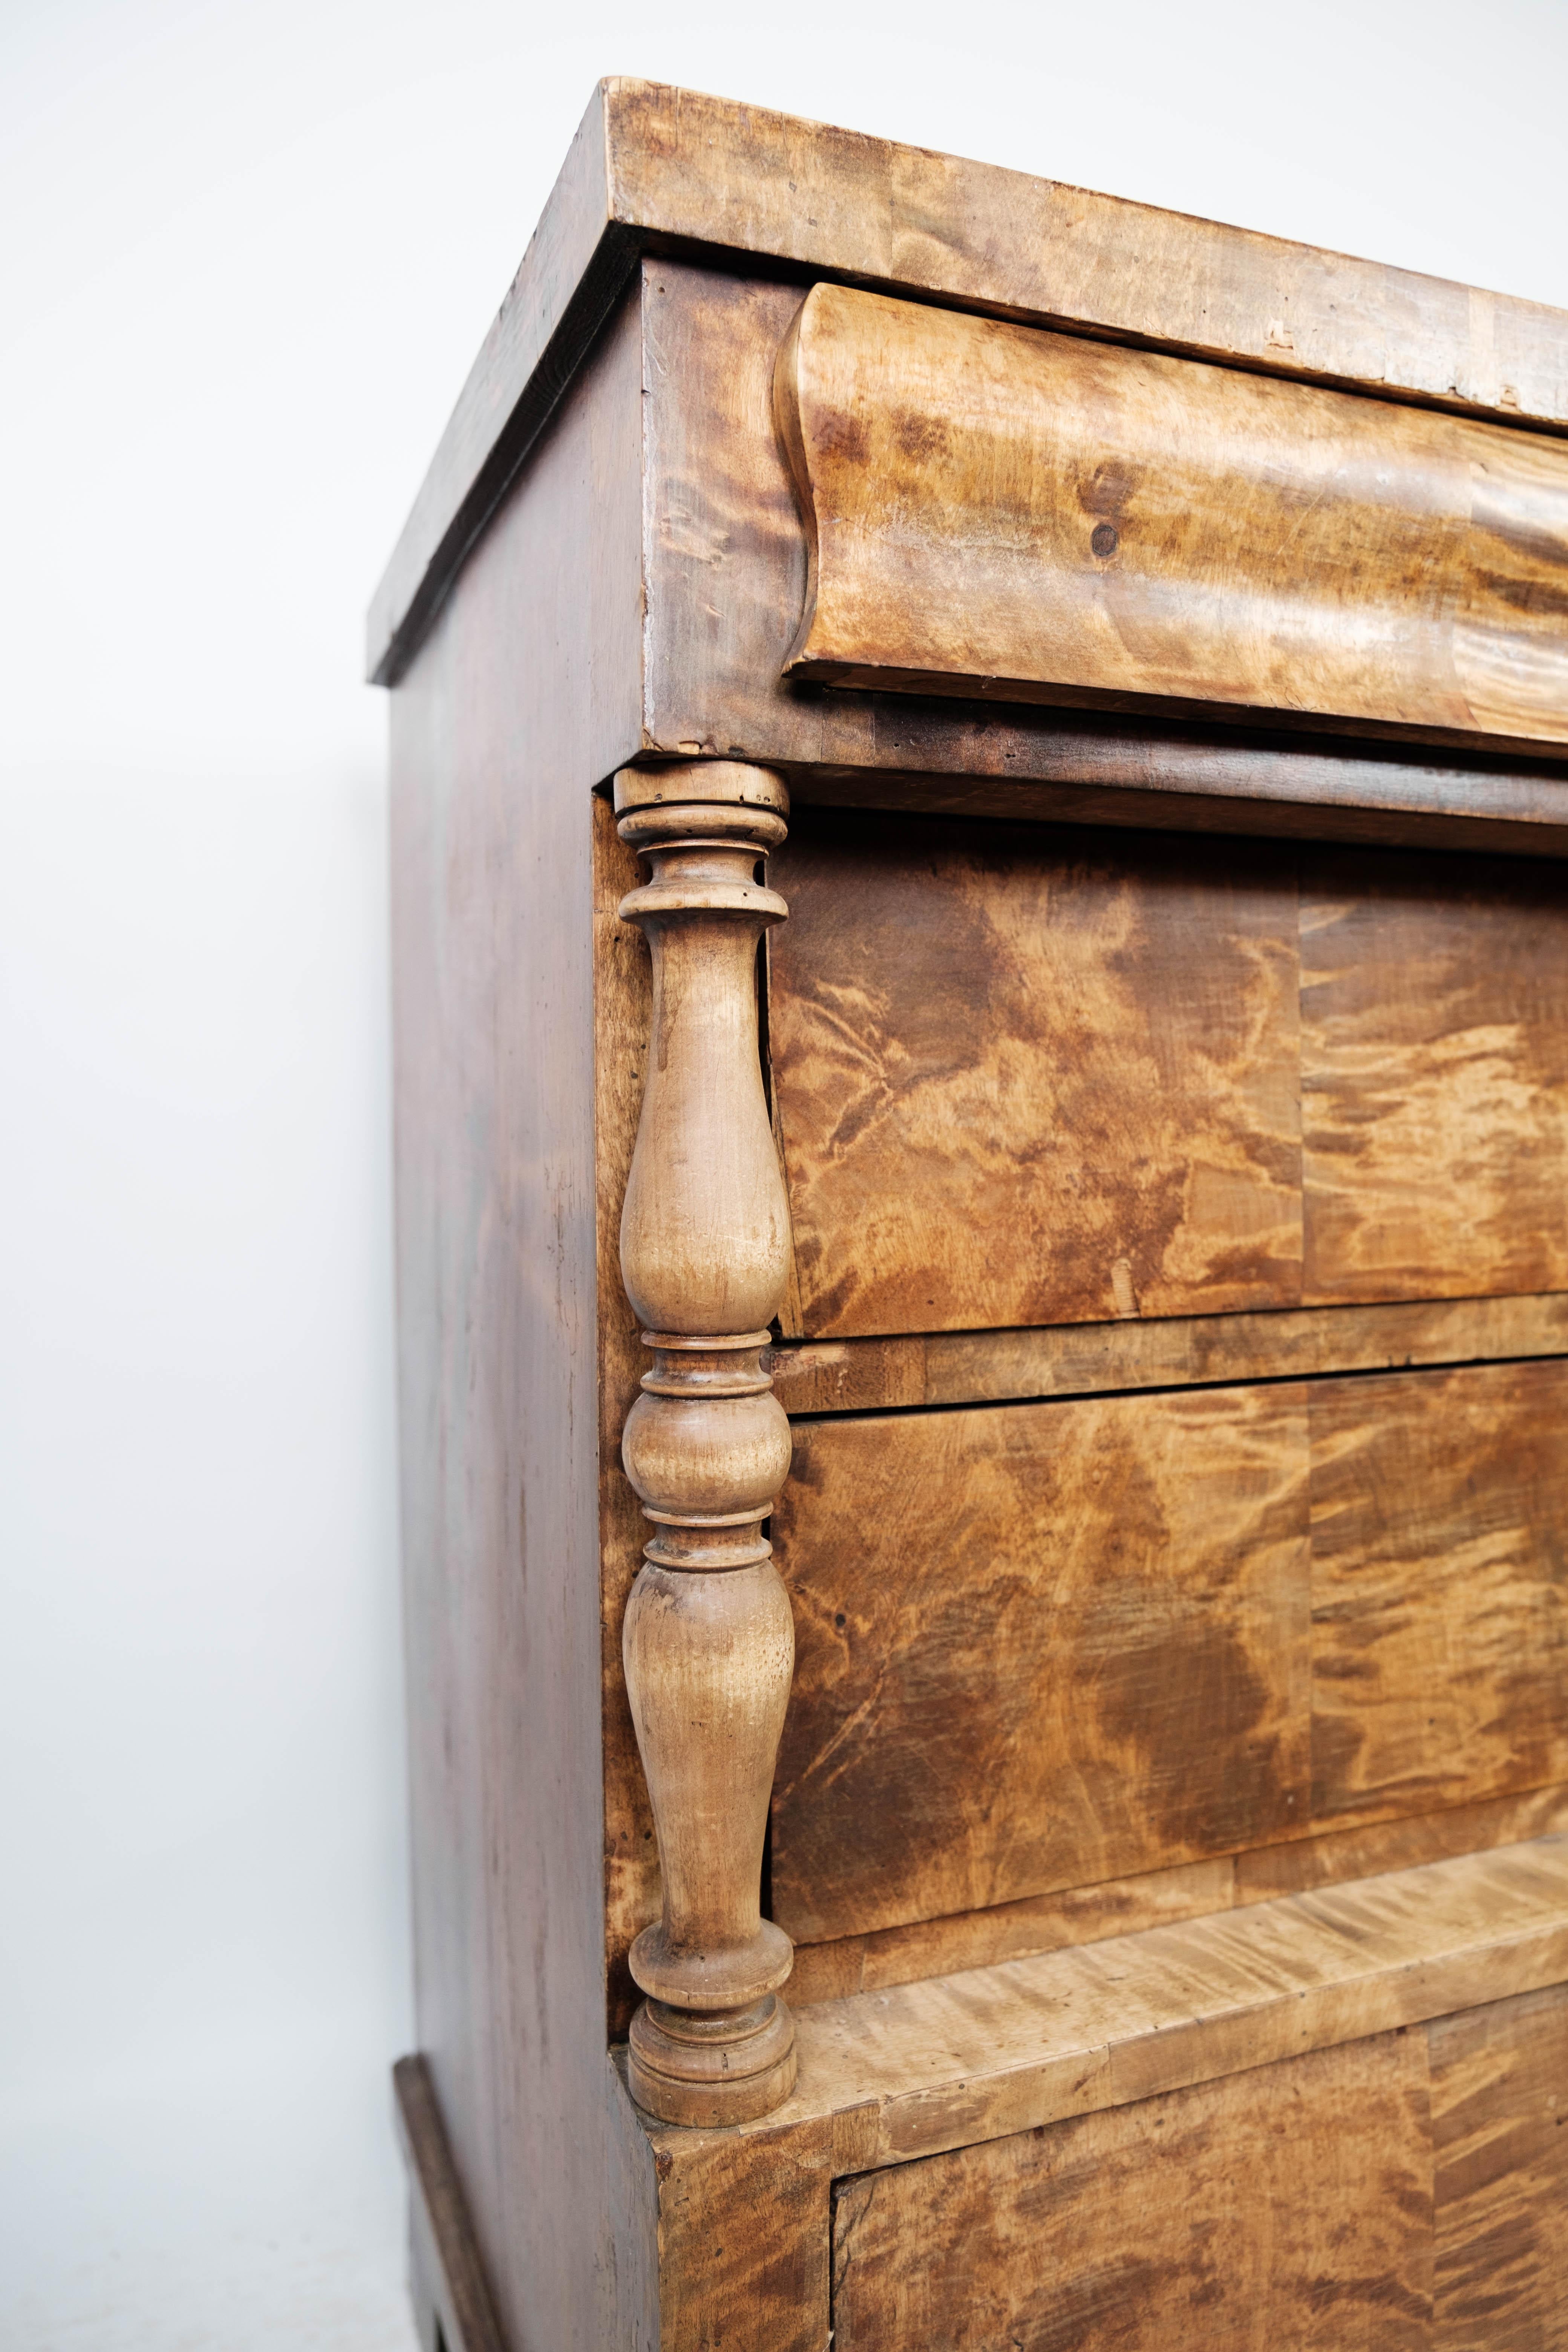 Mid-19th Century Late Empire Chest of Drawers of Birch Wood from around the 1840s